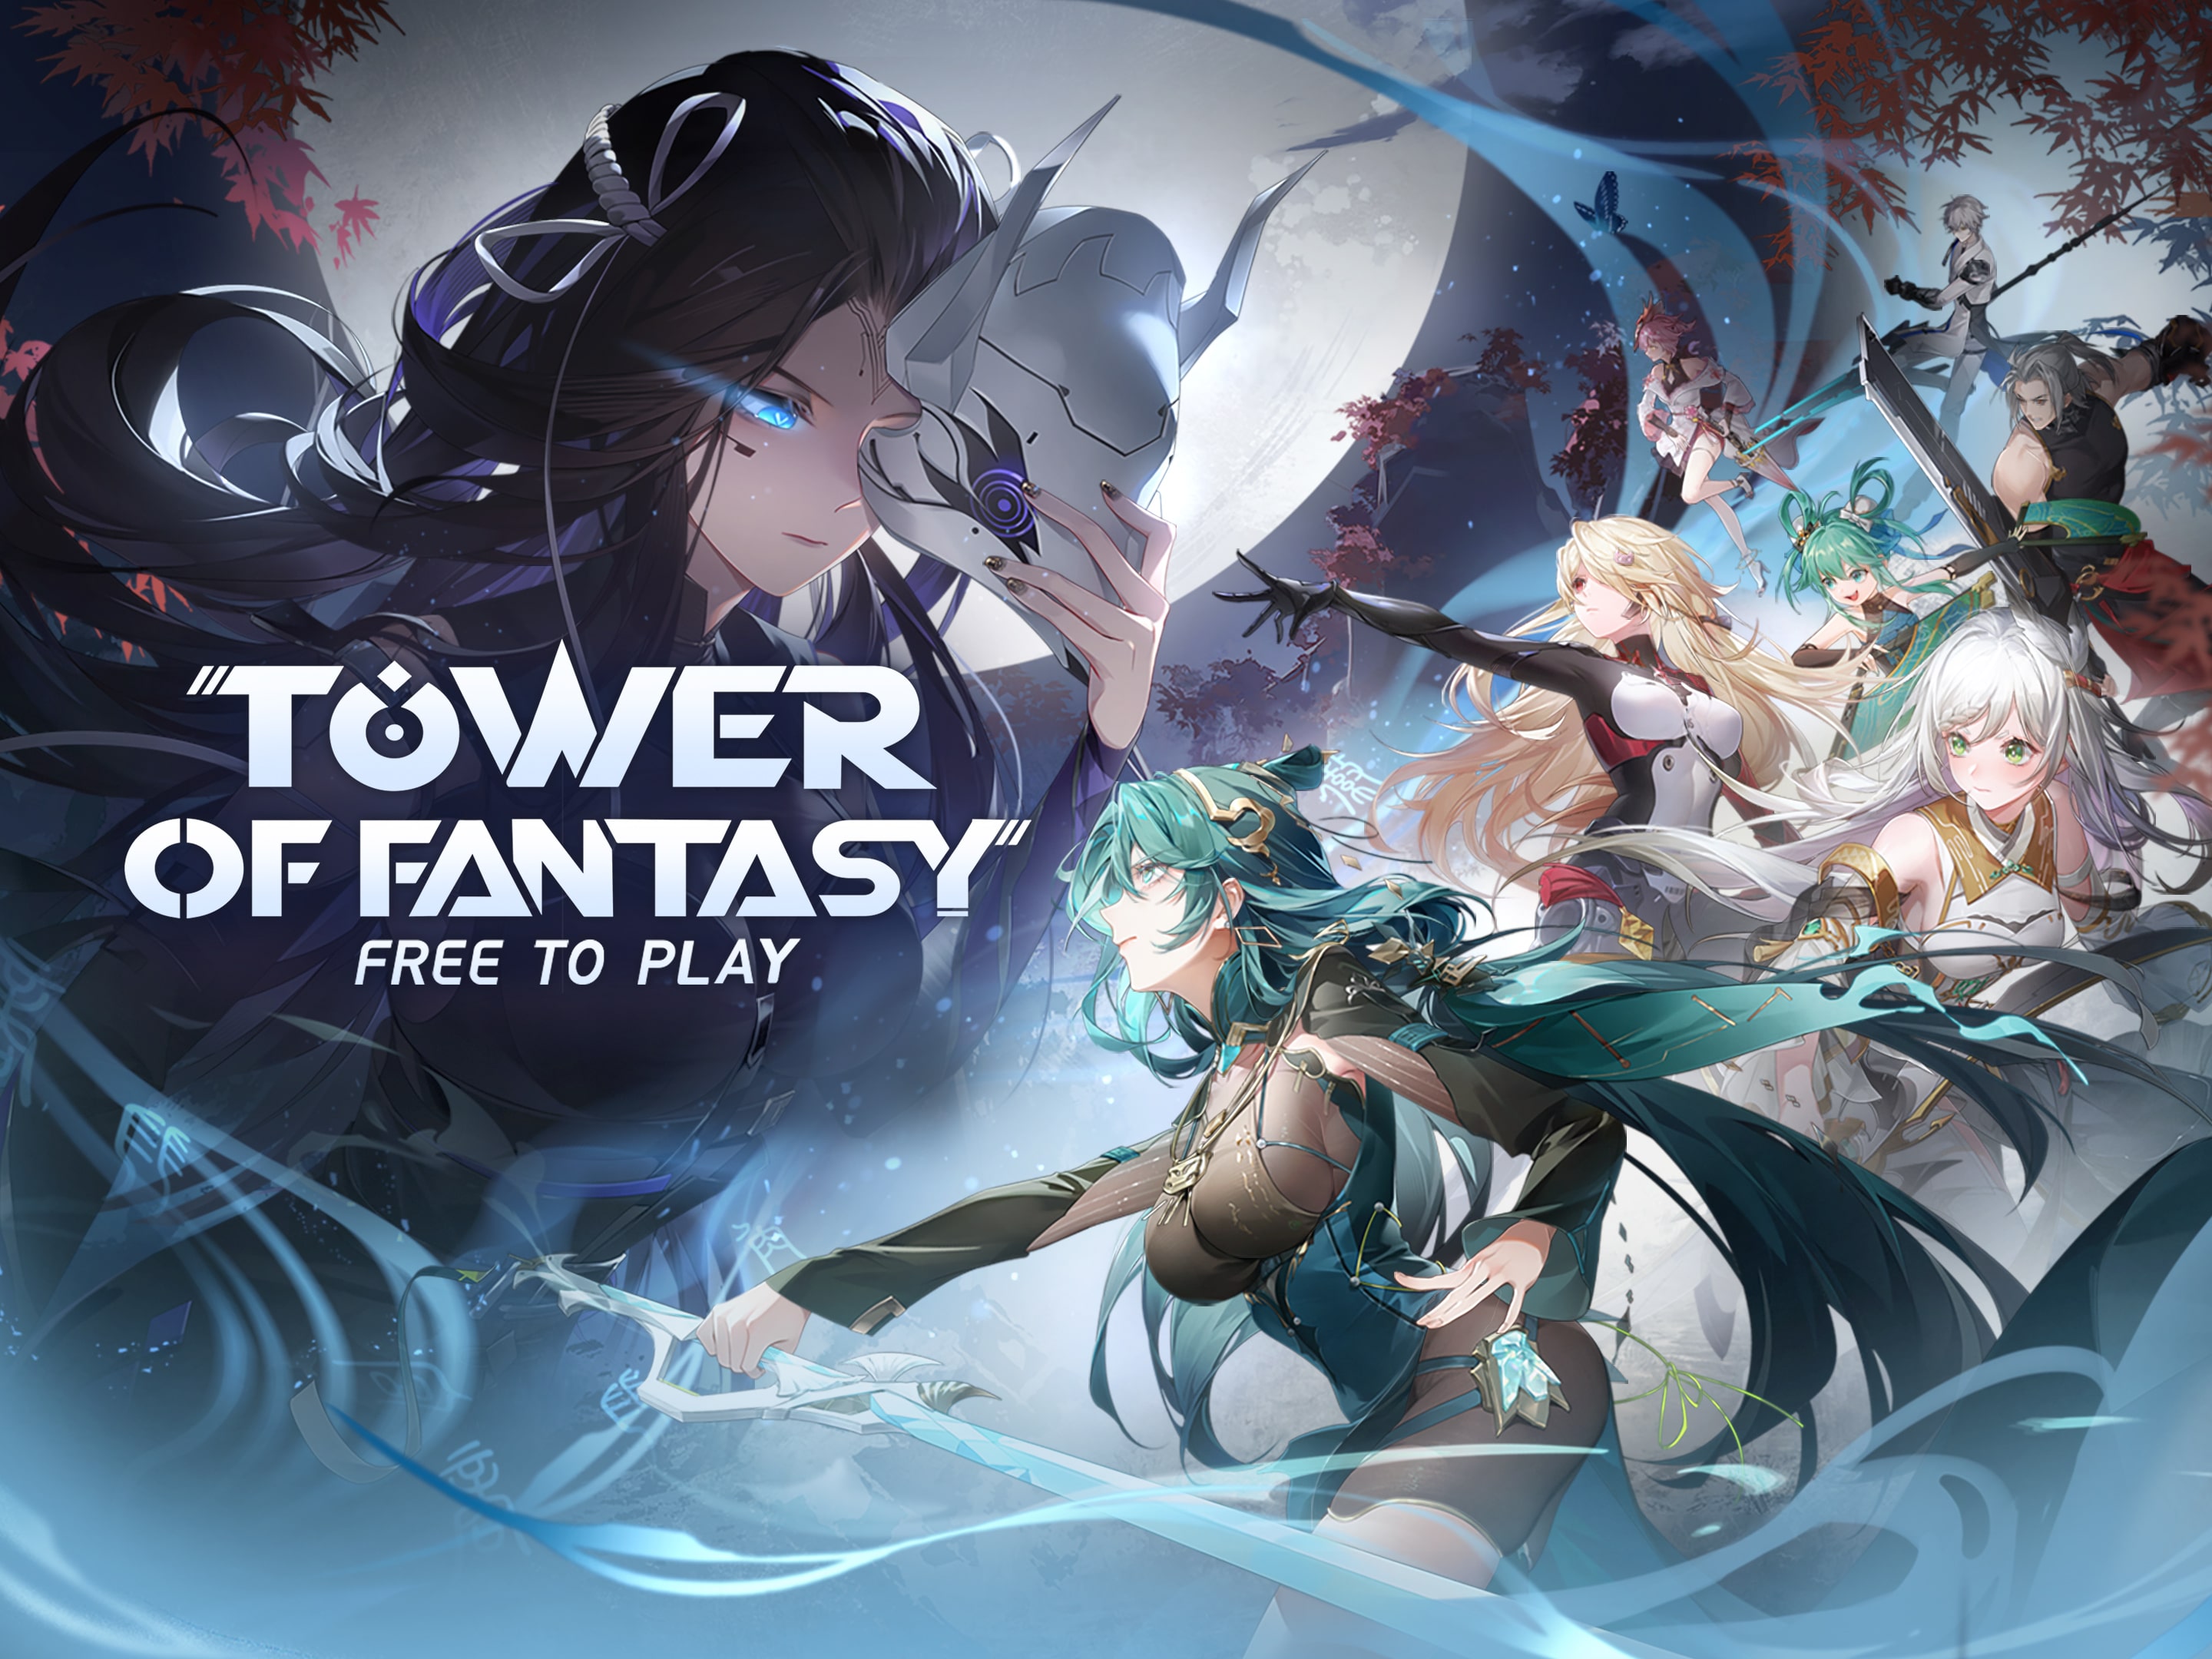 Tower of Fantasy download and requirements